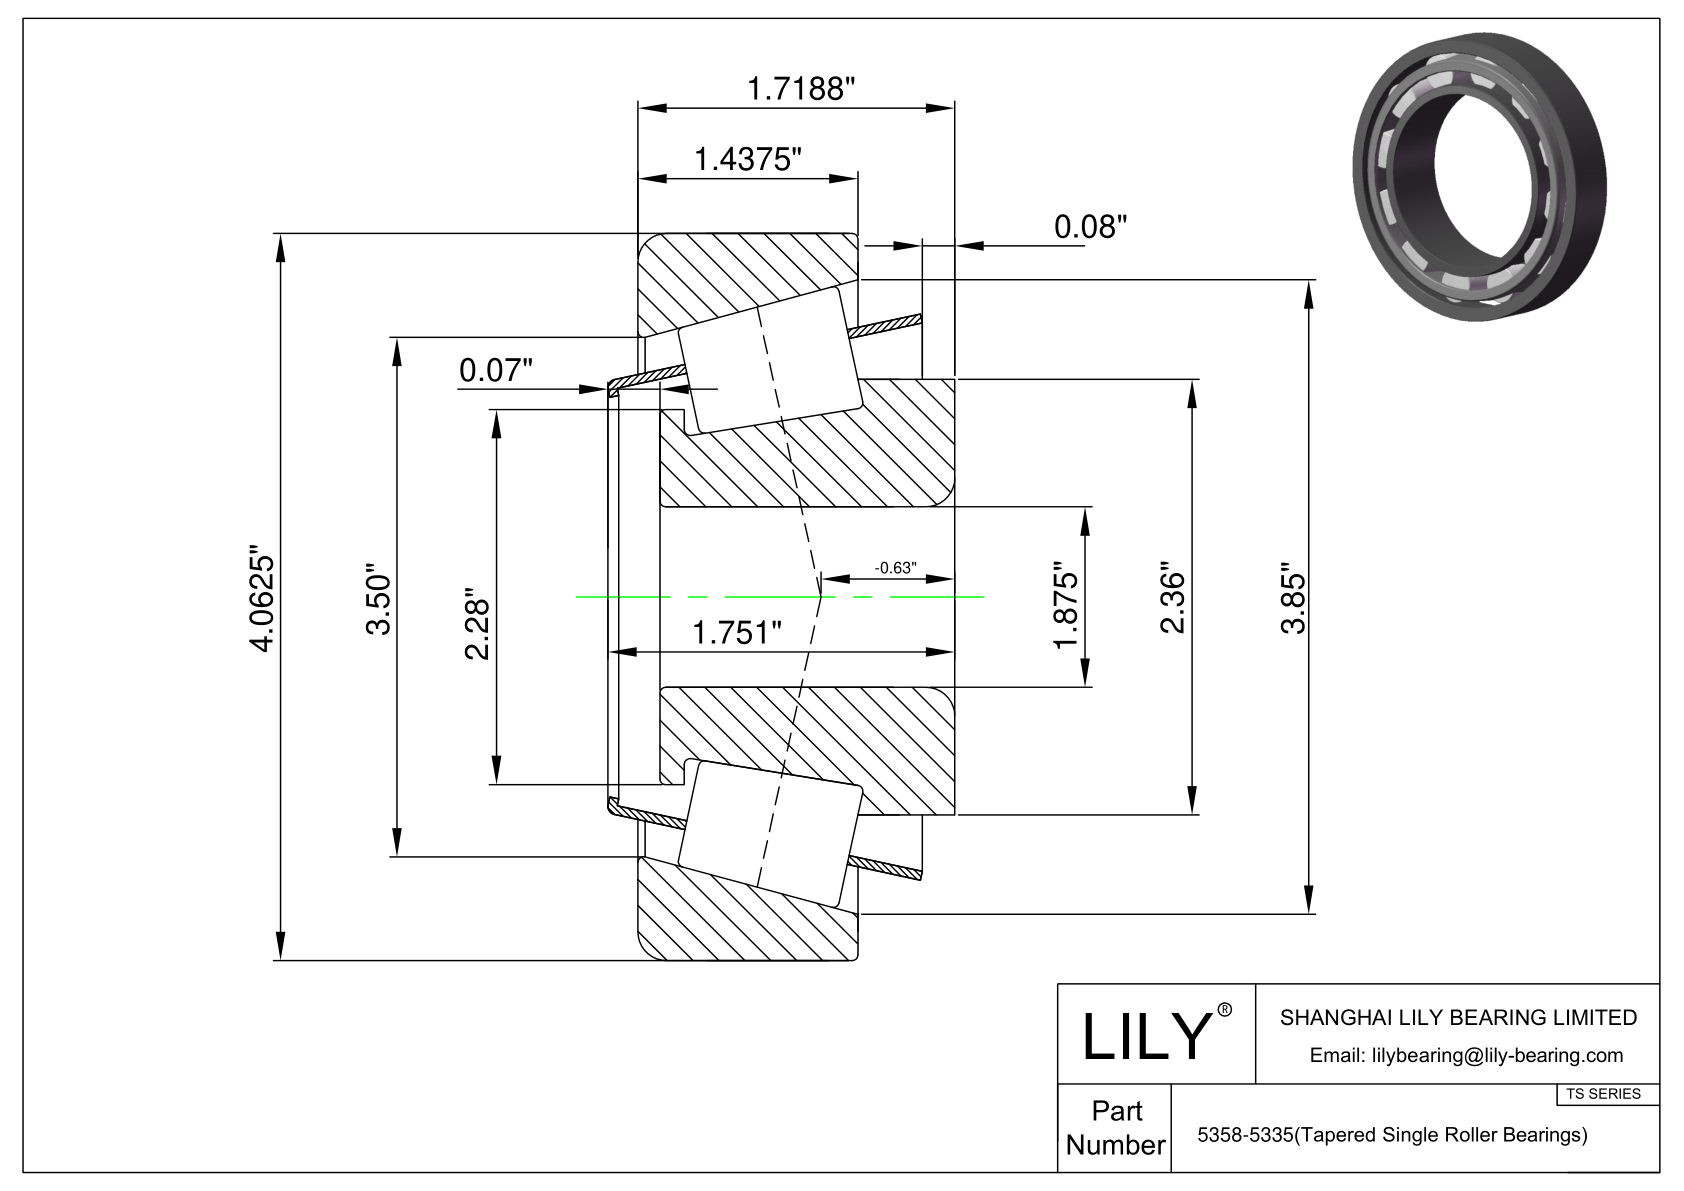 5358-5335 TS (Tapered Single Roller Bearings) (Imperial) cad drawing